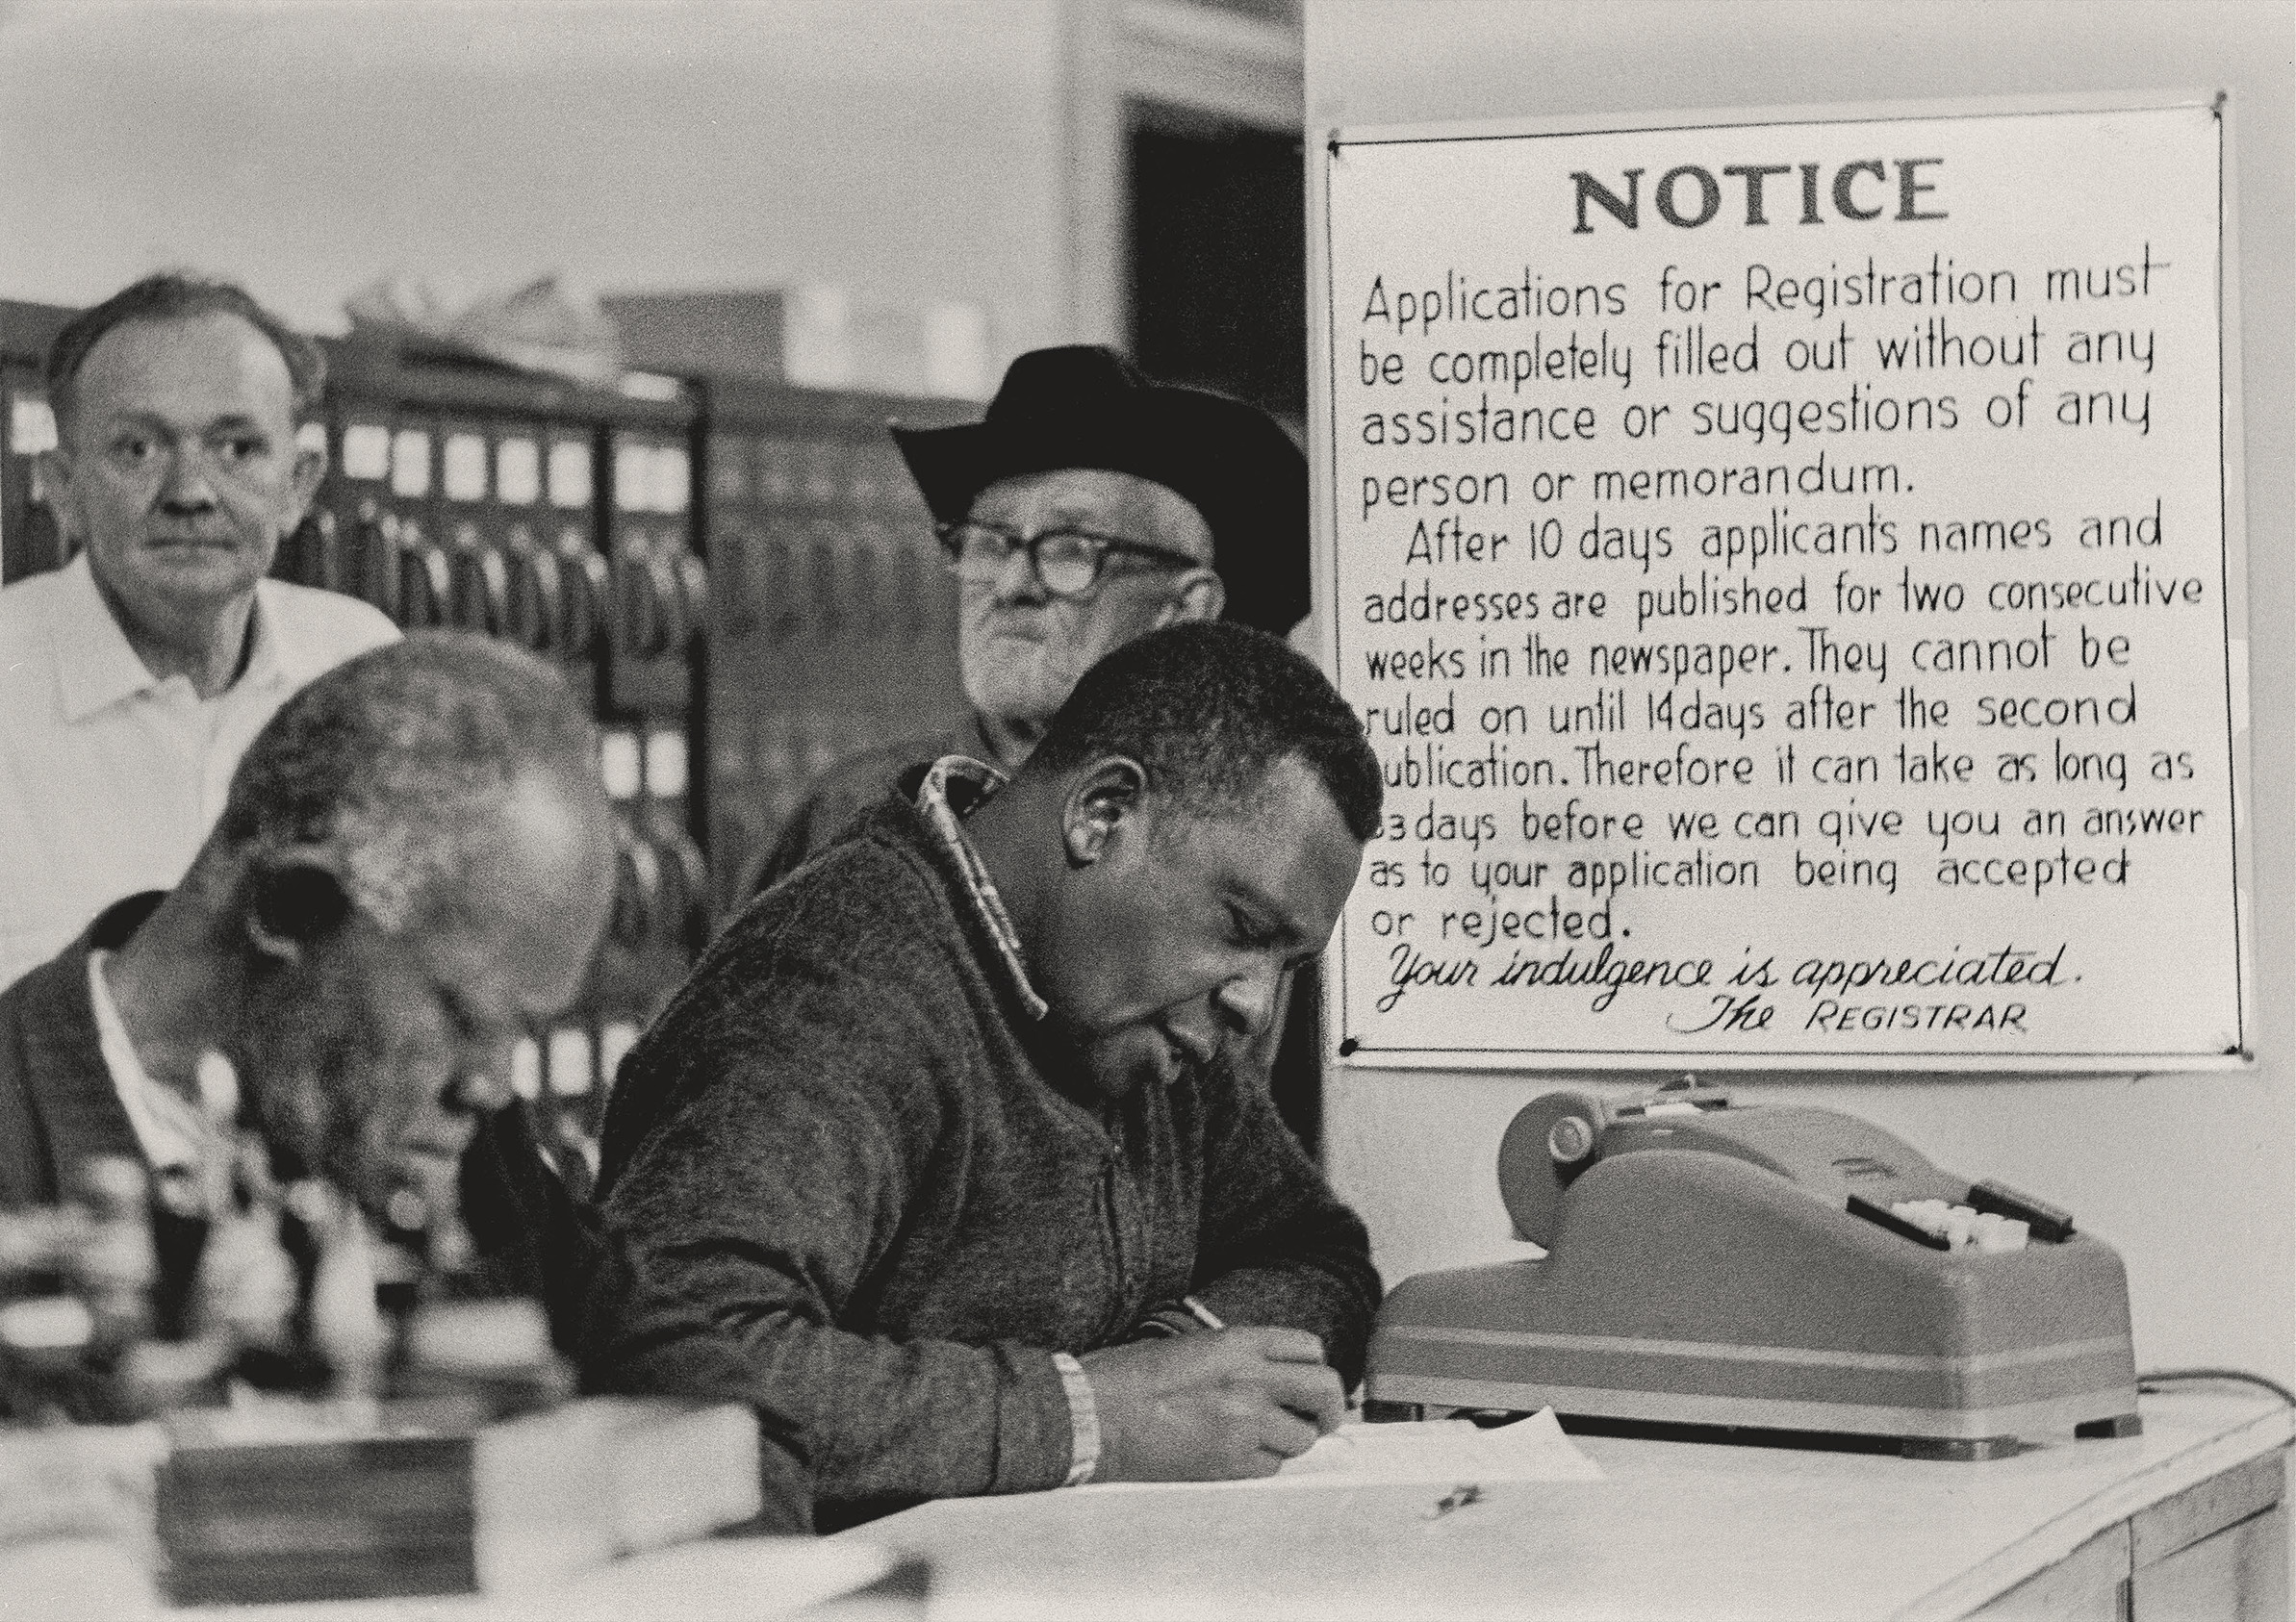 Threat to Registration, Hattiesburg, Mississippi, 22 January 1964. Photograph by Matt Herron. Black citizens filling out voter registration forms at the Forrest County Courthouse Clerk's Office run by Theron Lynd. Sign on the wall indicates the ordeal of public exposure applicants face, a tactic used to discourage Black registration. © 1976, Matt Herron / Photograph provided by TakeStock.